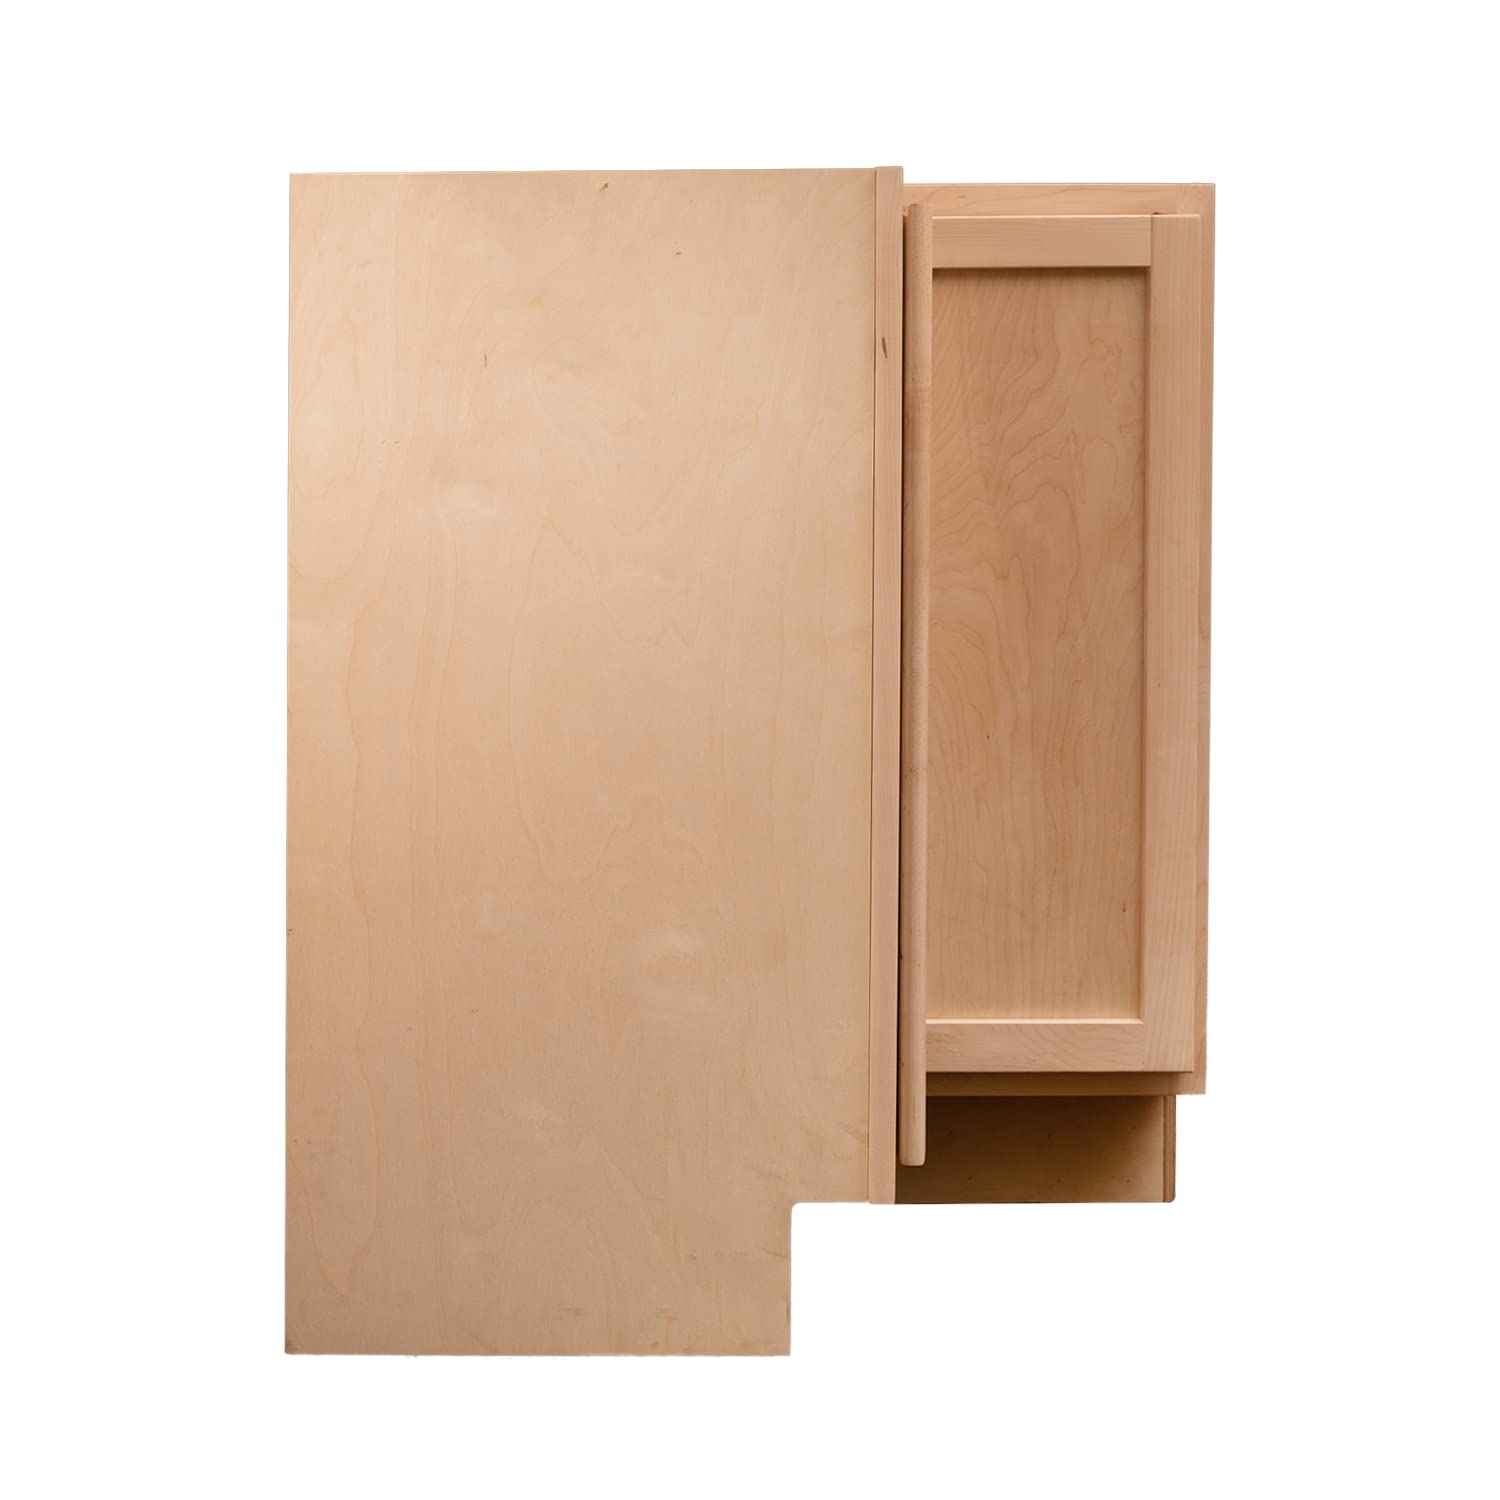 Quicklock RTA (Ready-to-Assemble) | Base Kitchen Cabinets - Shaker Style | Plywood Box Construction | Made in America (Raw Maple, 18" D x 30" W x 34.5" H Lazy Susan)